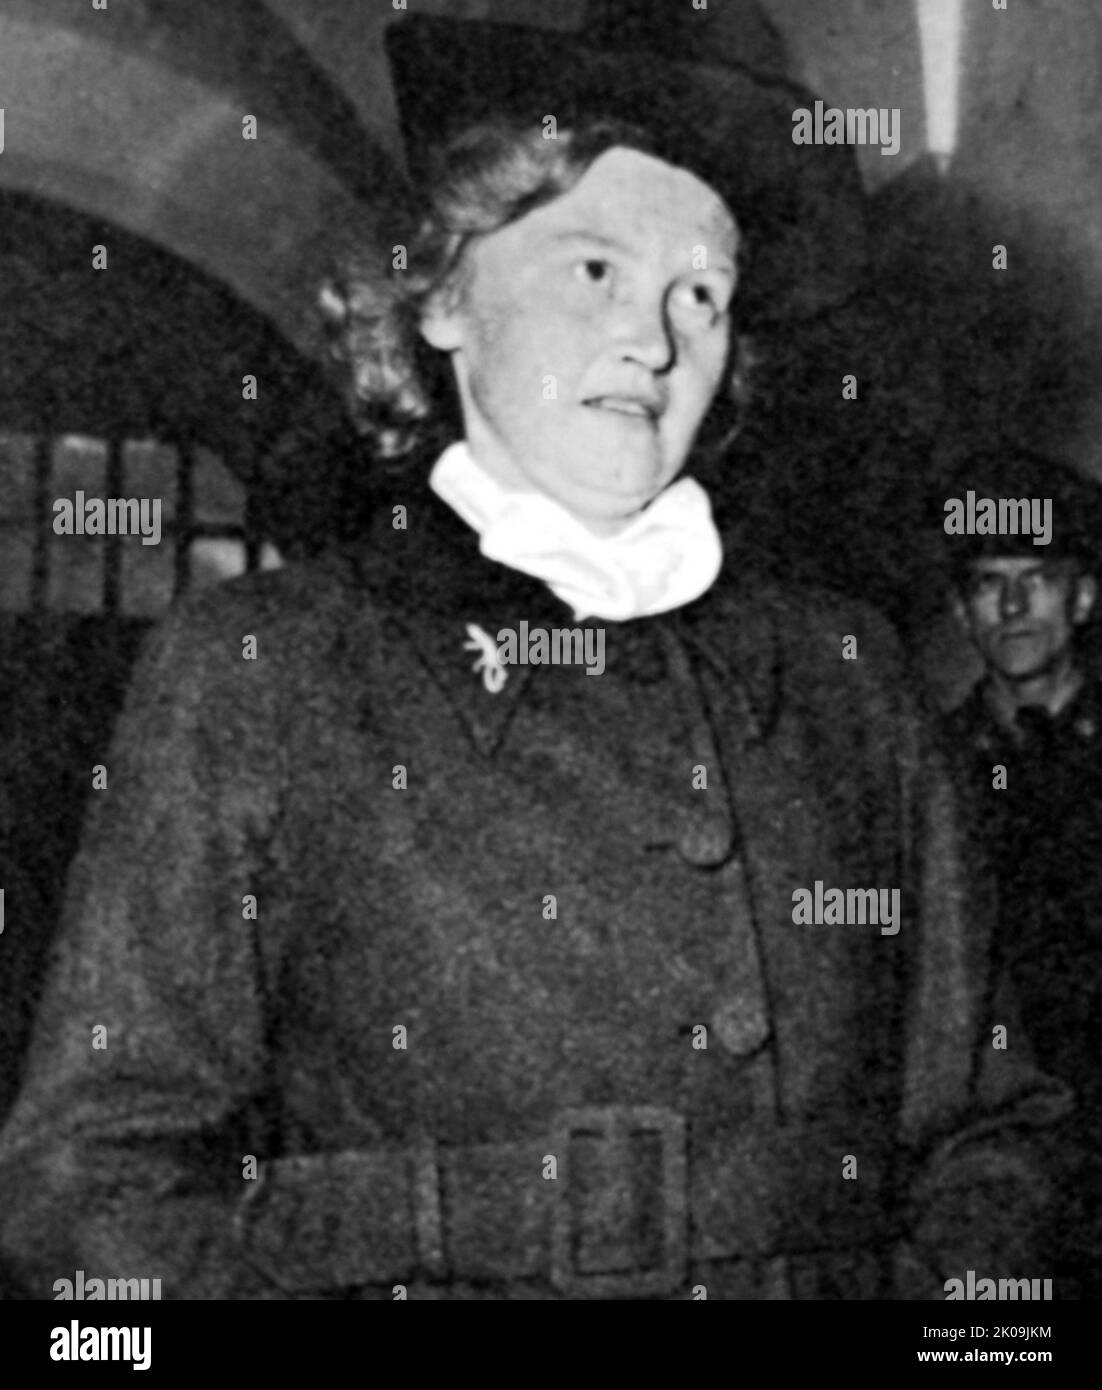 Ilse Koch (1906 - 1967) Nazi war criminal who was an overseer at Nazi concentration camps run by her husband, commandant Karl-Otto Koch. Working at Buchenwald (1937-1941) and Majdanek (1941-1943), Koch became infamous for her sadistic, brutal treatment of prisoners. In 1947, she became one of the first prominent Nazis tried by the U.S. military. Stock Photo